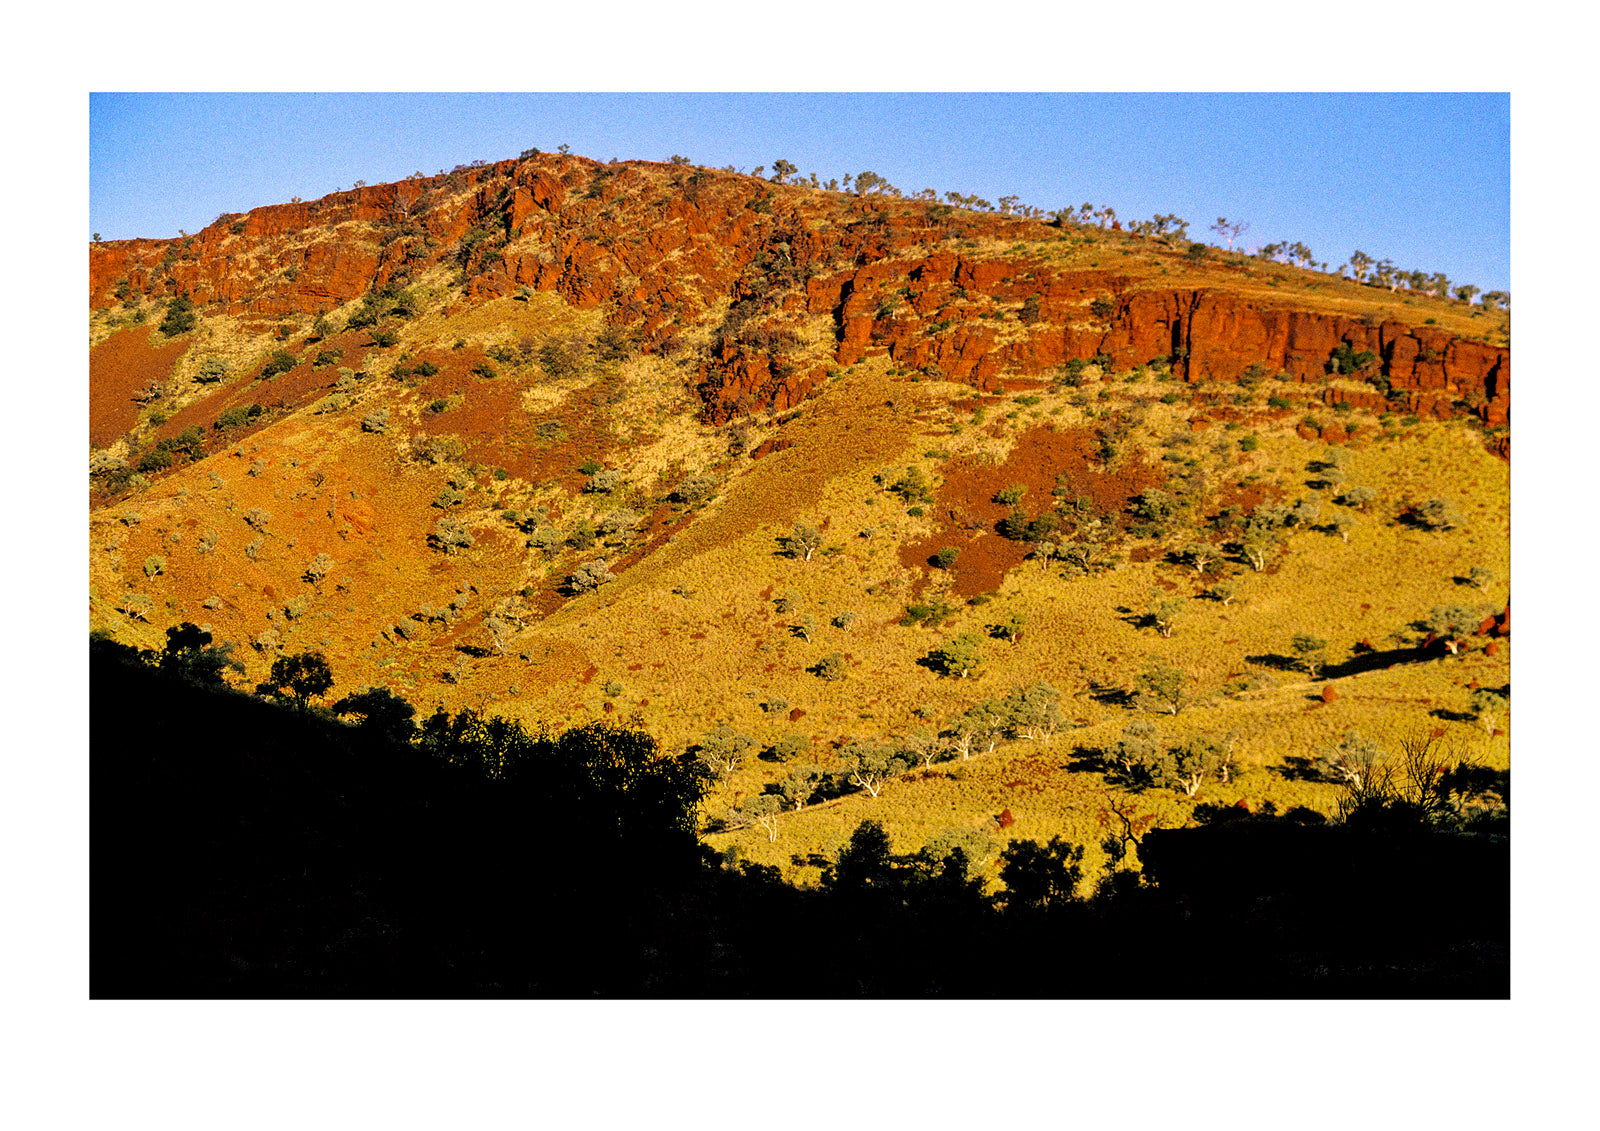 Ancient red cliffs and Ghost Gums illuminated by the setting sun. Hammersley Ranges National Park, Pilbara, Western Australia.